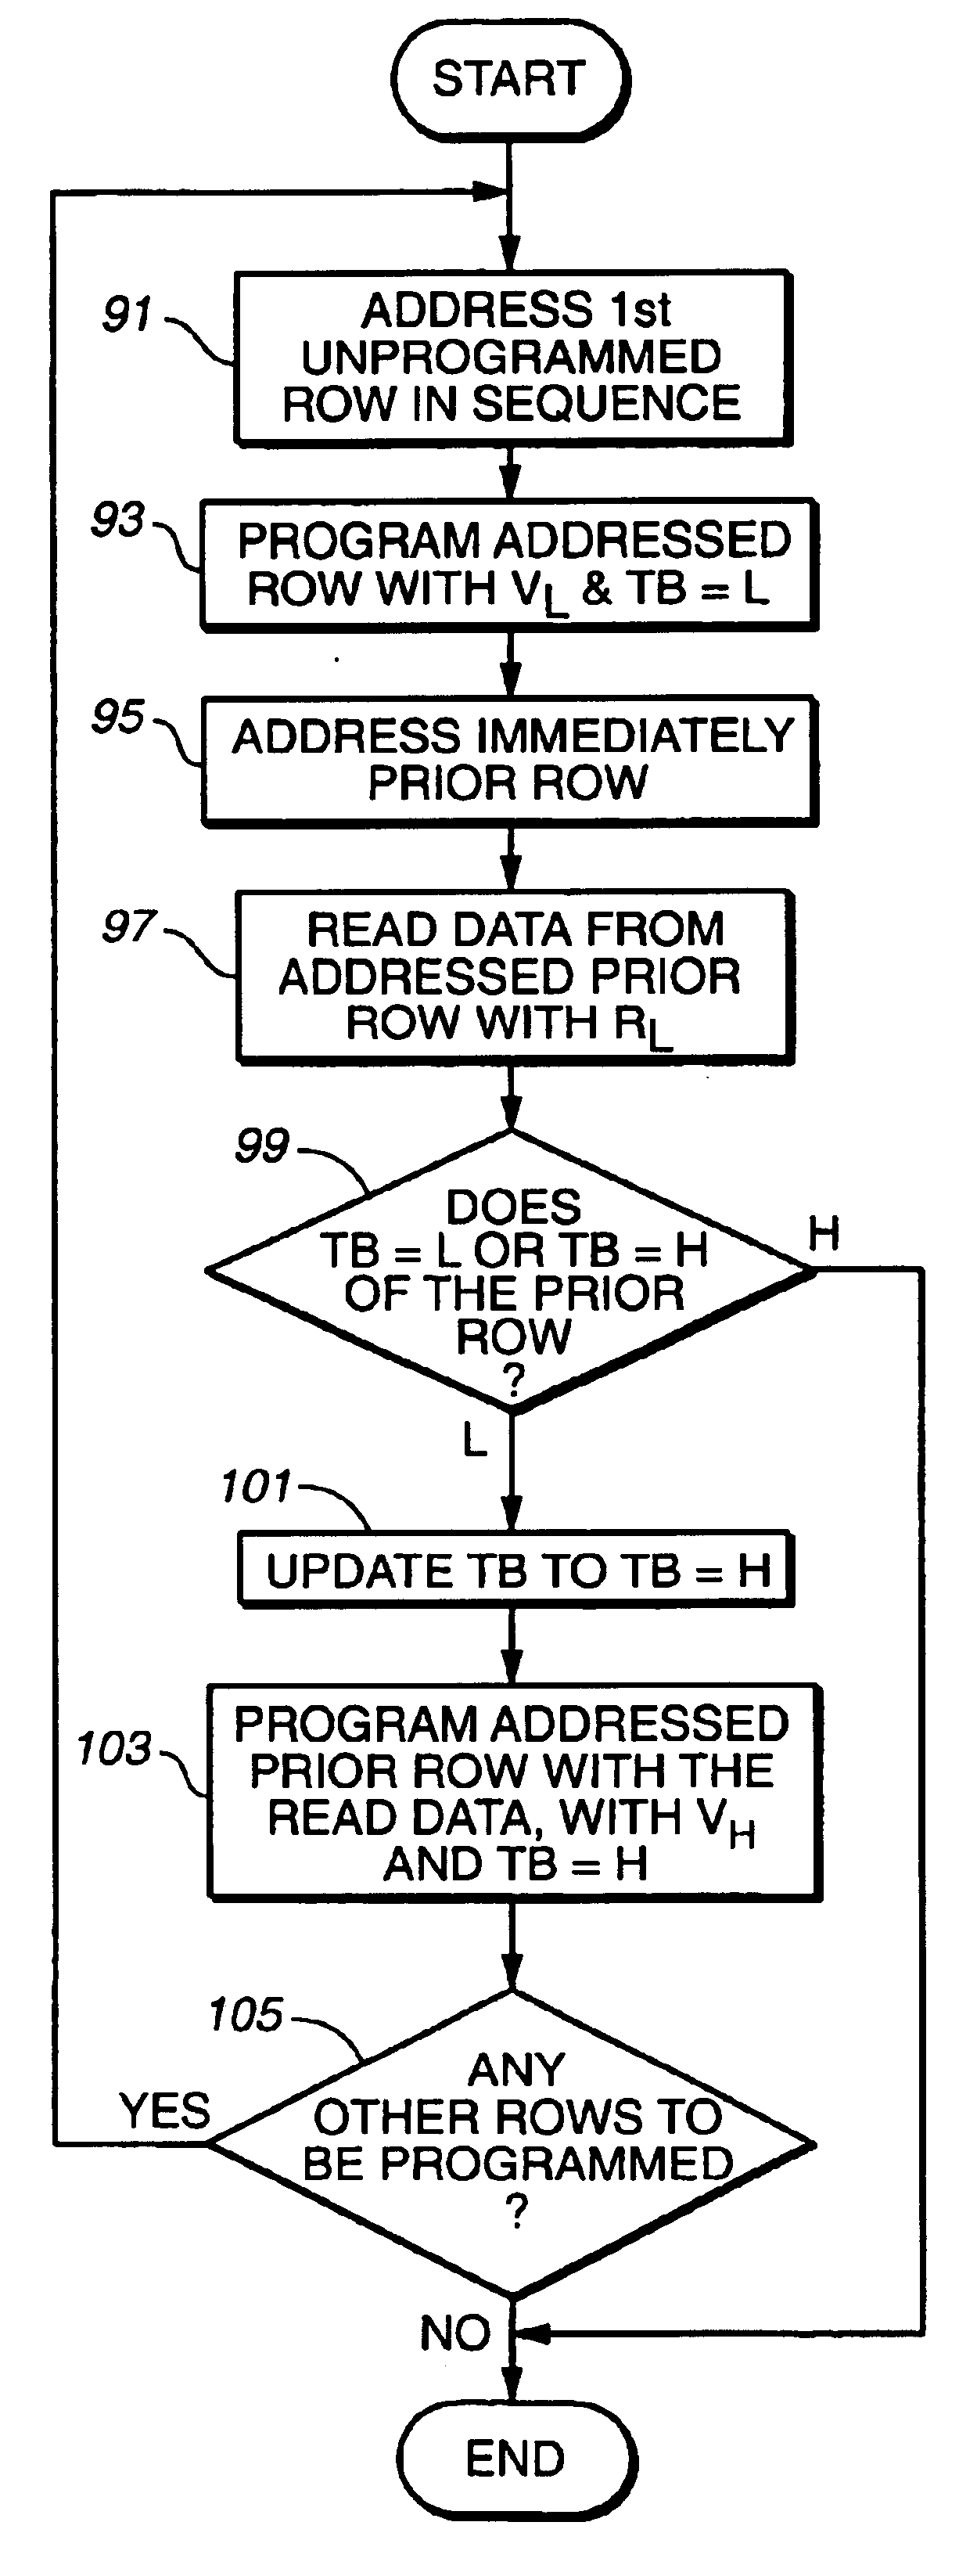 Techniques for reducing effects of coupling between storage elements of adjacent rows of memory cells